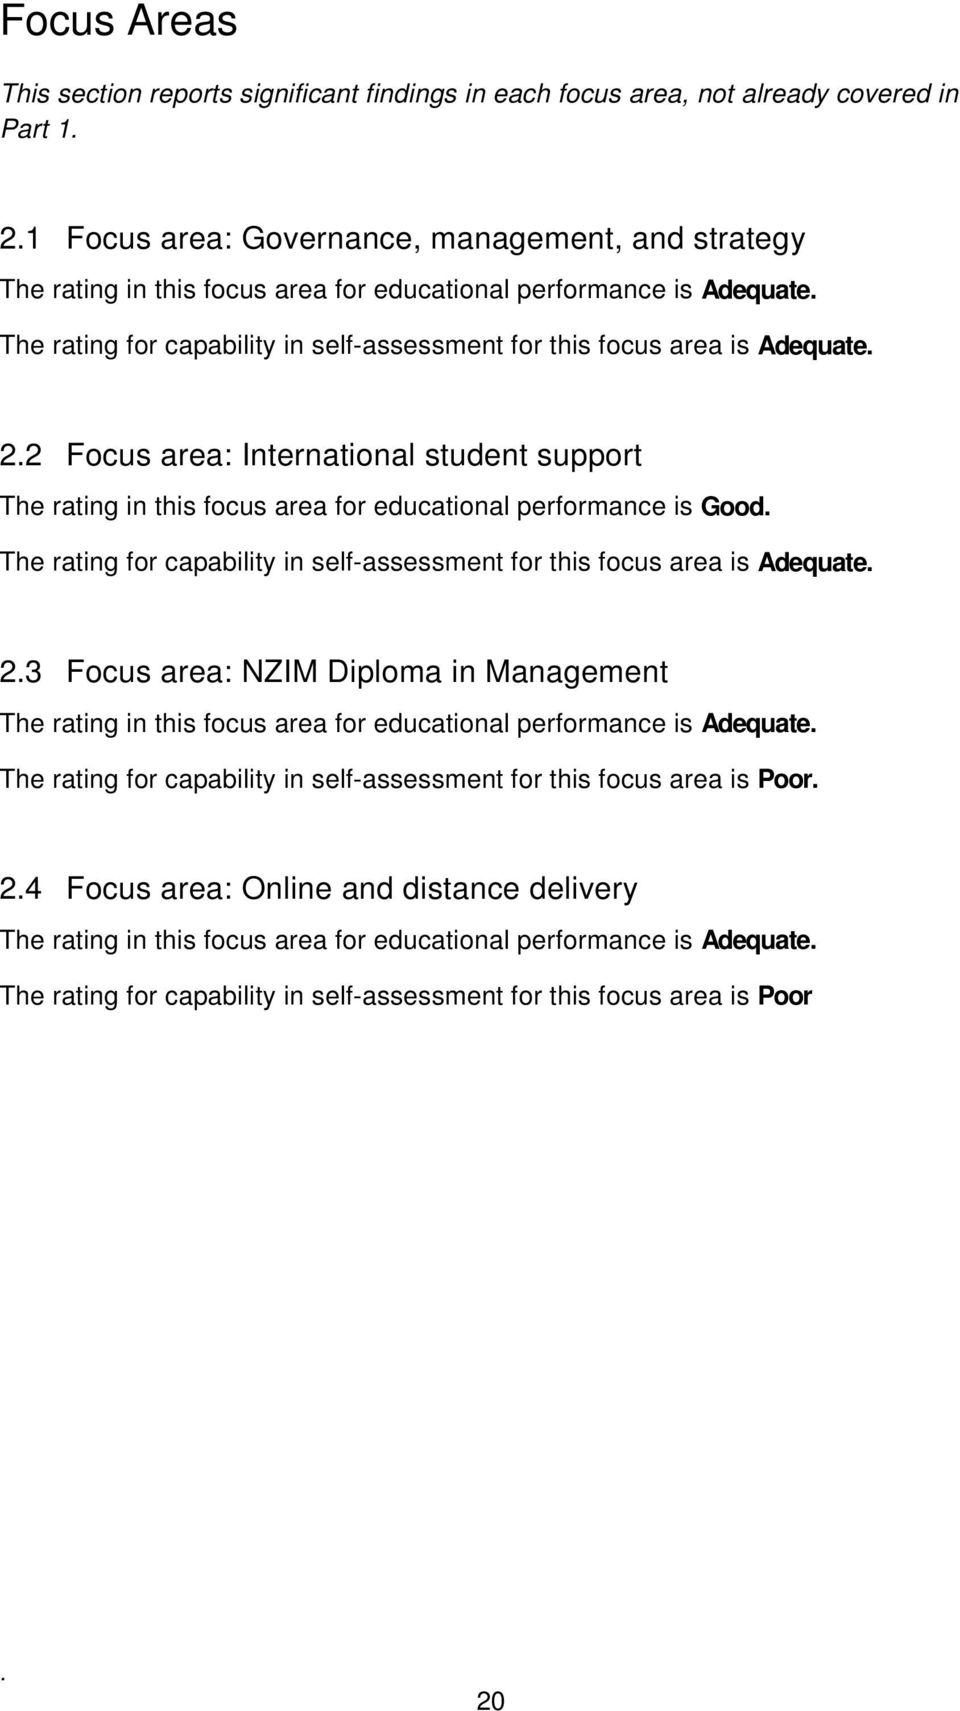 educational performance is Good The rating for capability in self-assessment for this focus area is Adequate 23 Focus area: NZIM Diploma in Management The rating in this focus area for educational